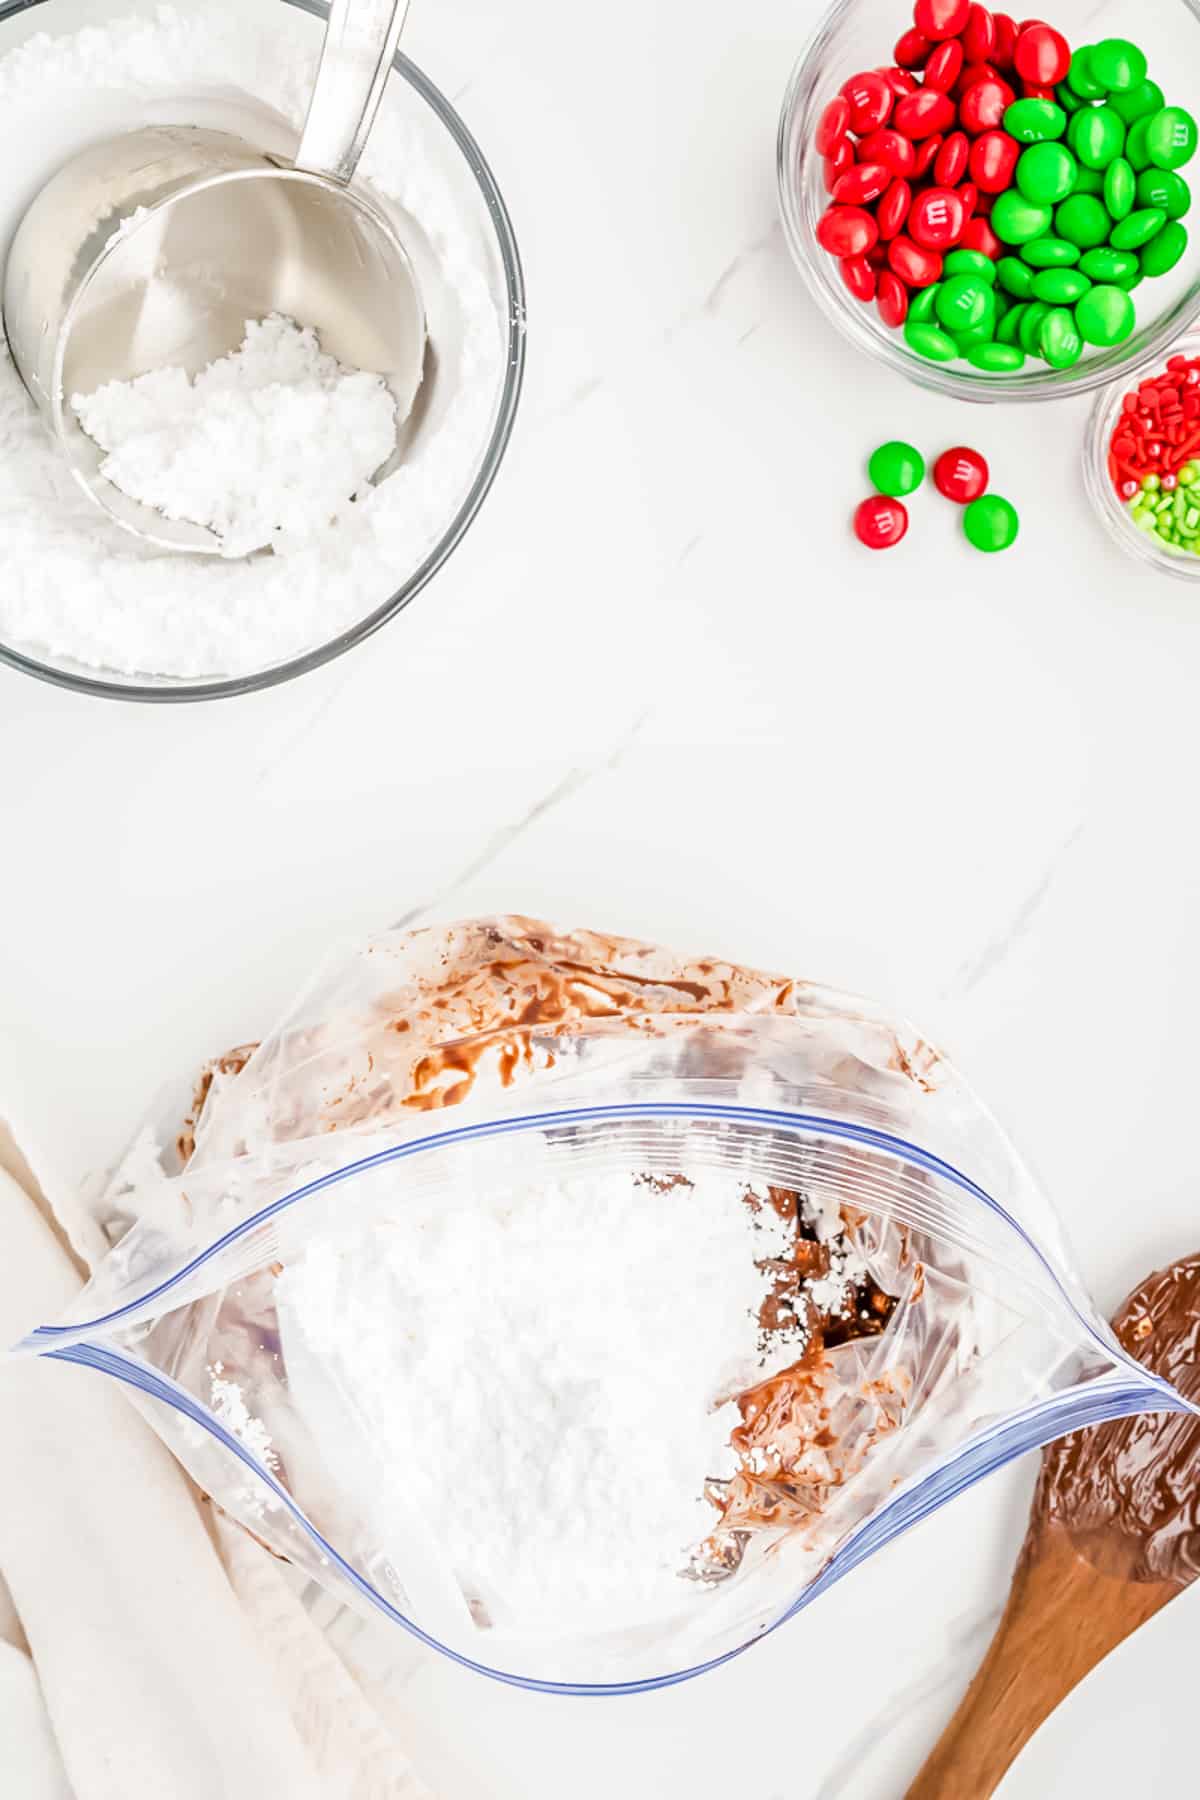 Adding powdered sugar to a chocolate coated cereal in a zip top bag from overhead on a counter with M&Ms and sprinkles in a bowl nearby.